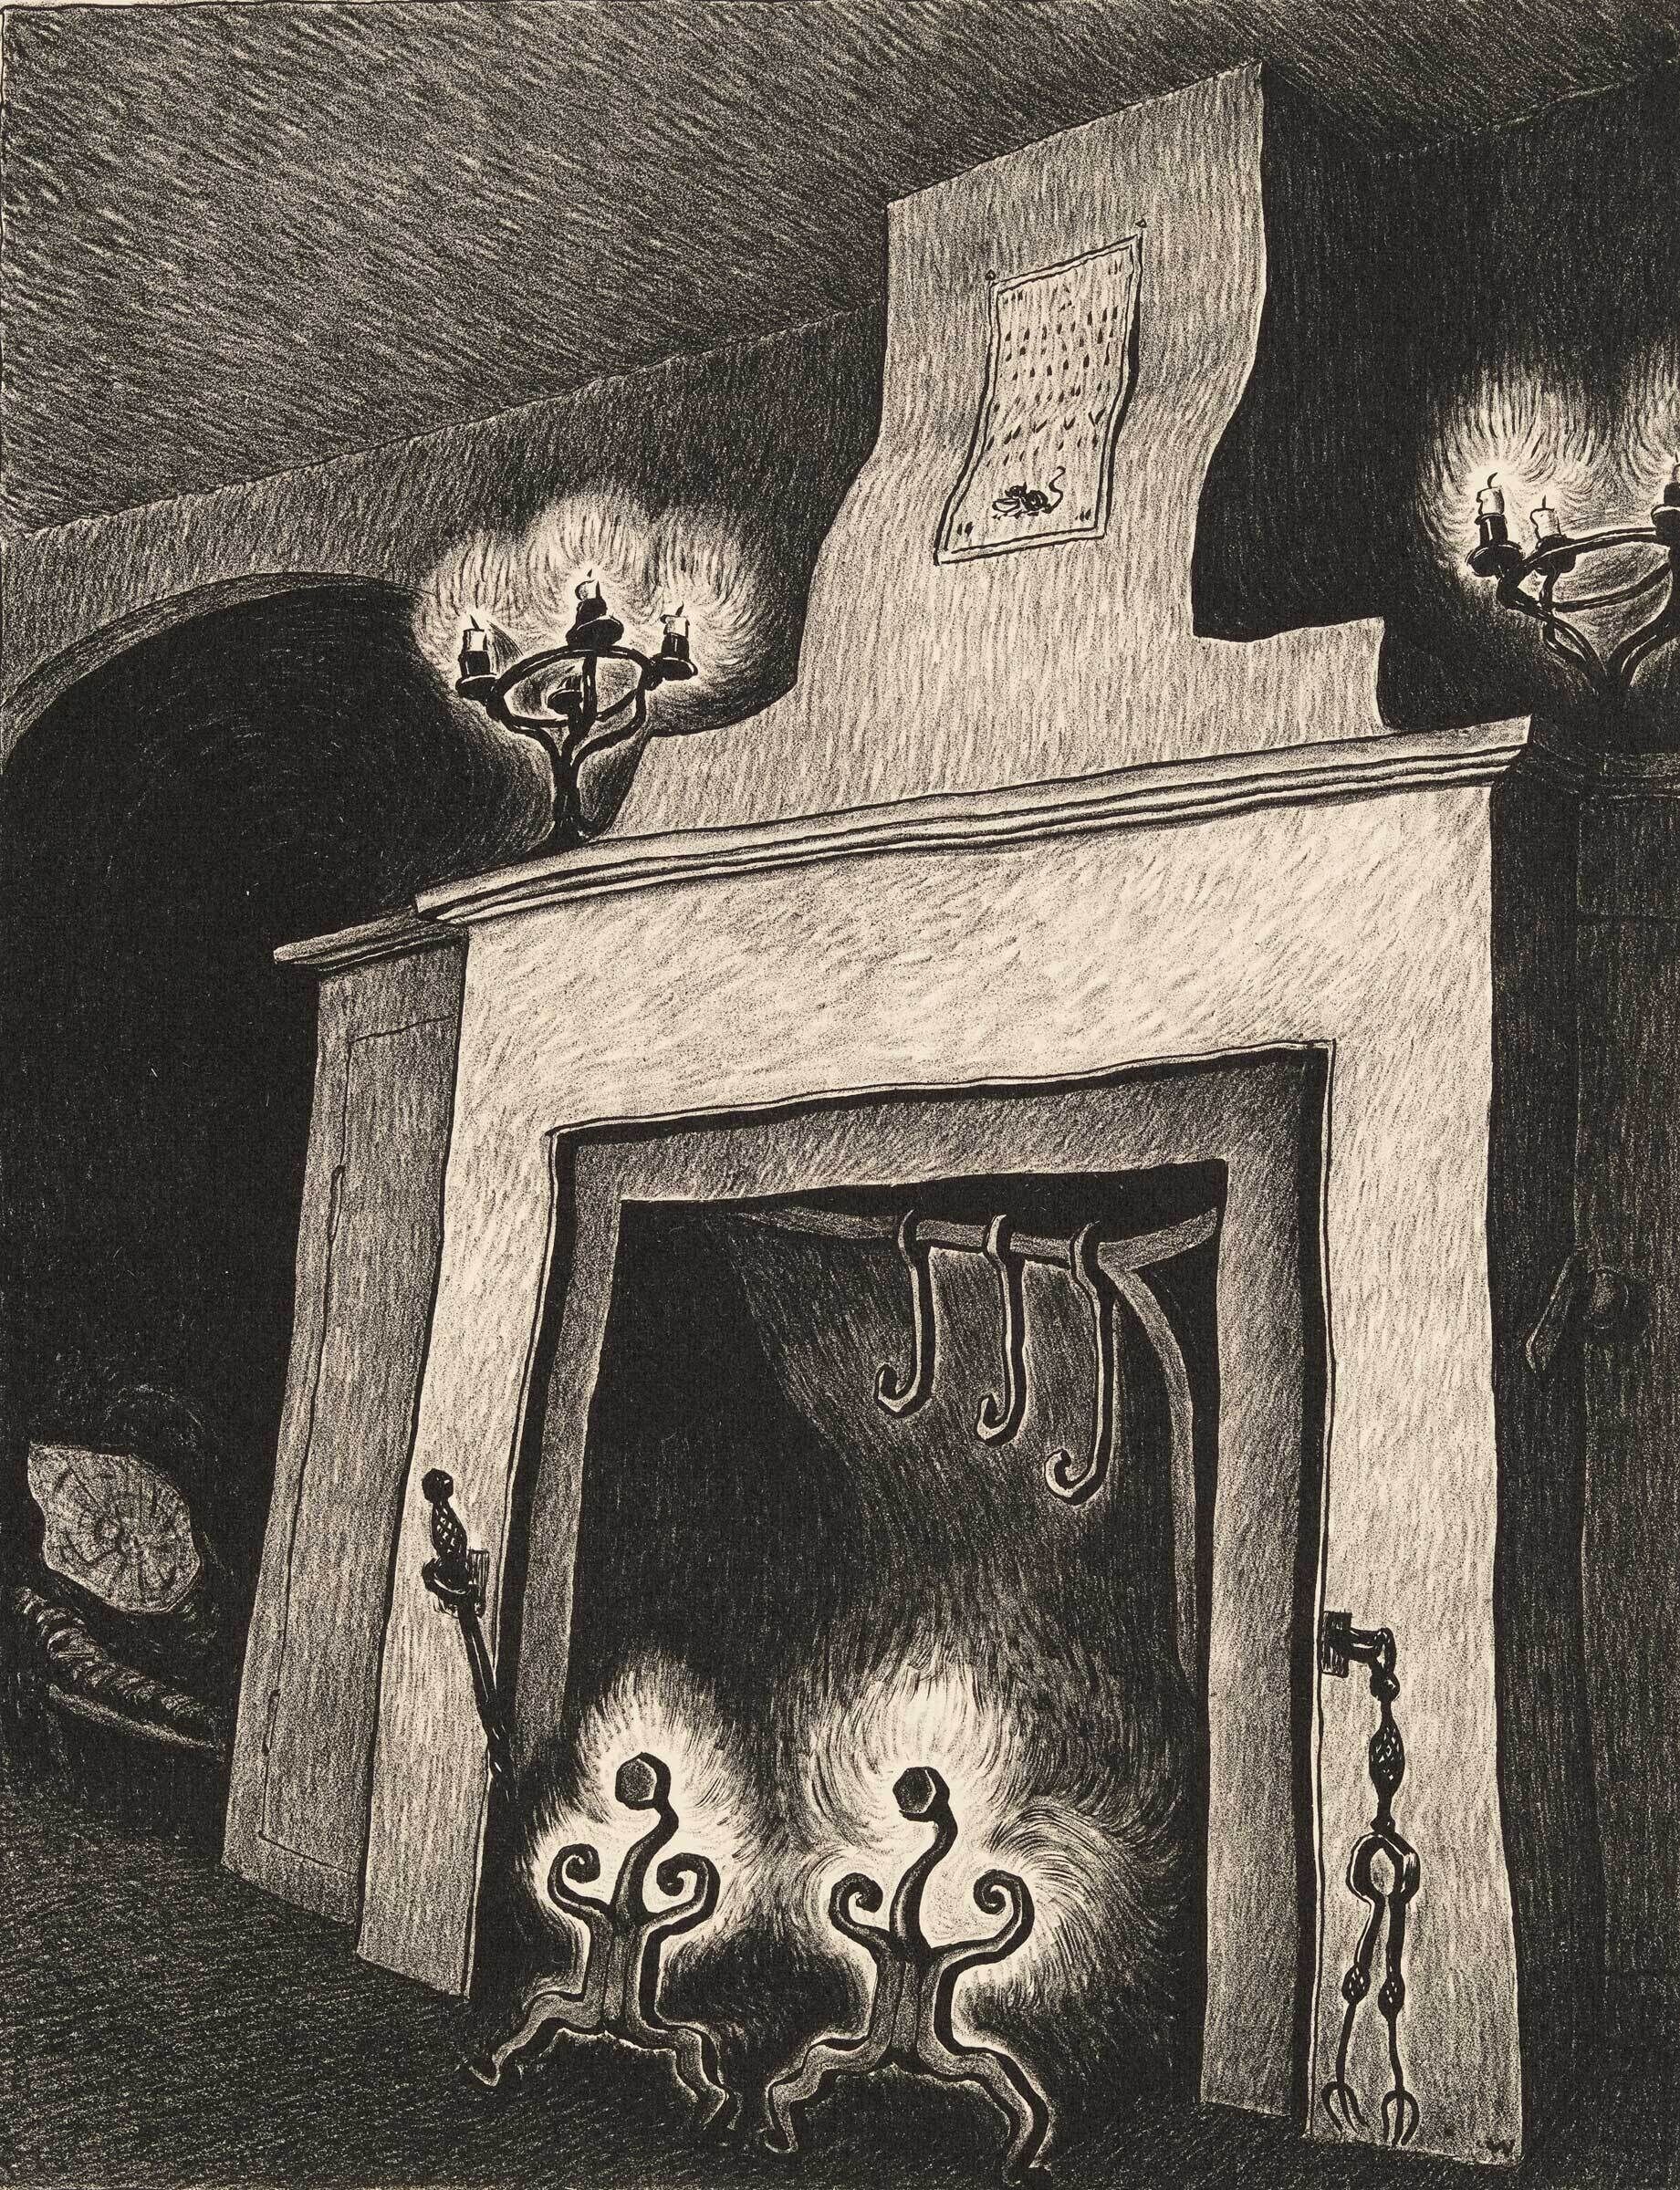 An etching of a whimsical fireplace with anthropomorphic flames dancing in the hearth and shadowy wall sconces.